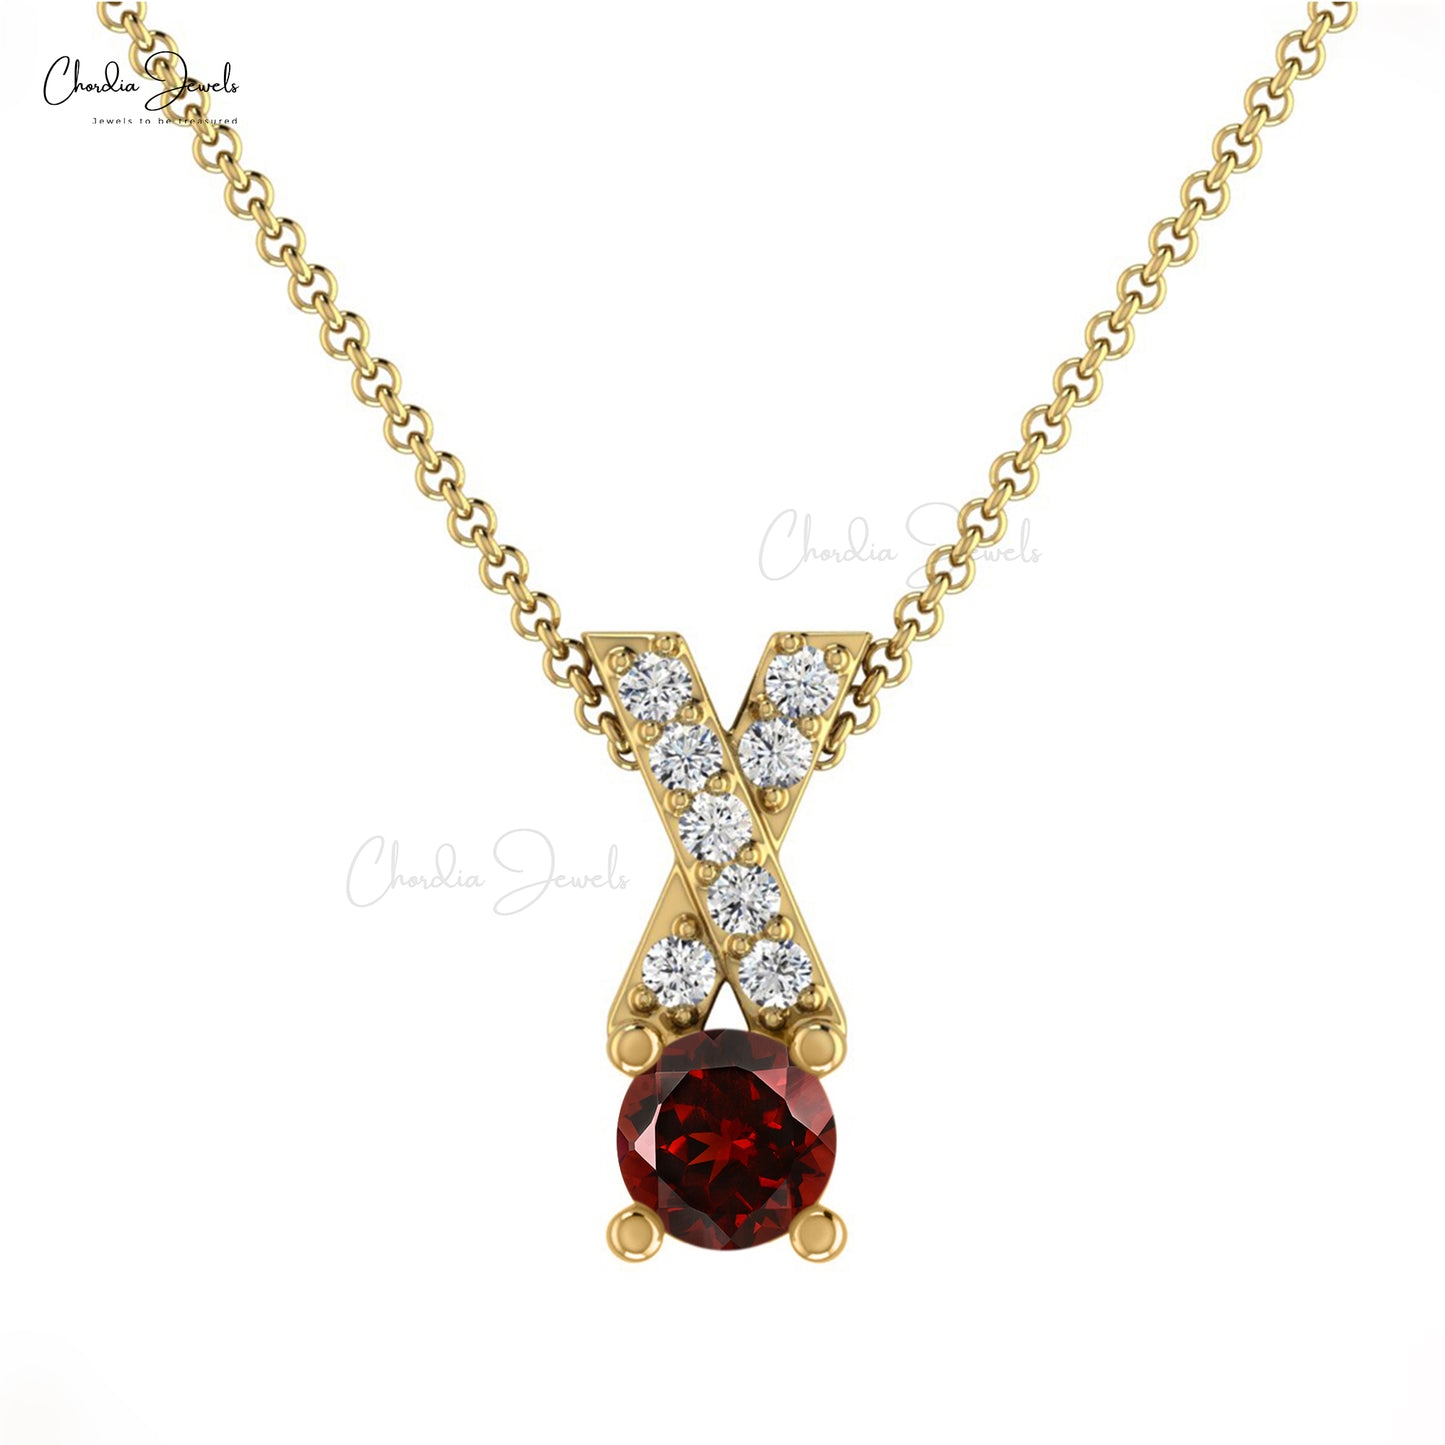 Natural White Diamond Criss Cross Pendant Necklace Round Shape Red Garnet Gemstone Pendant 14k Real Gold Jewelry For Gift